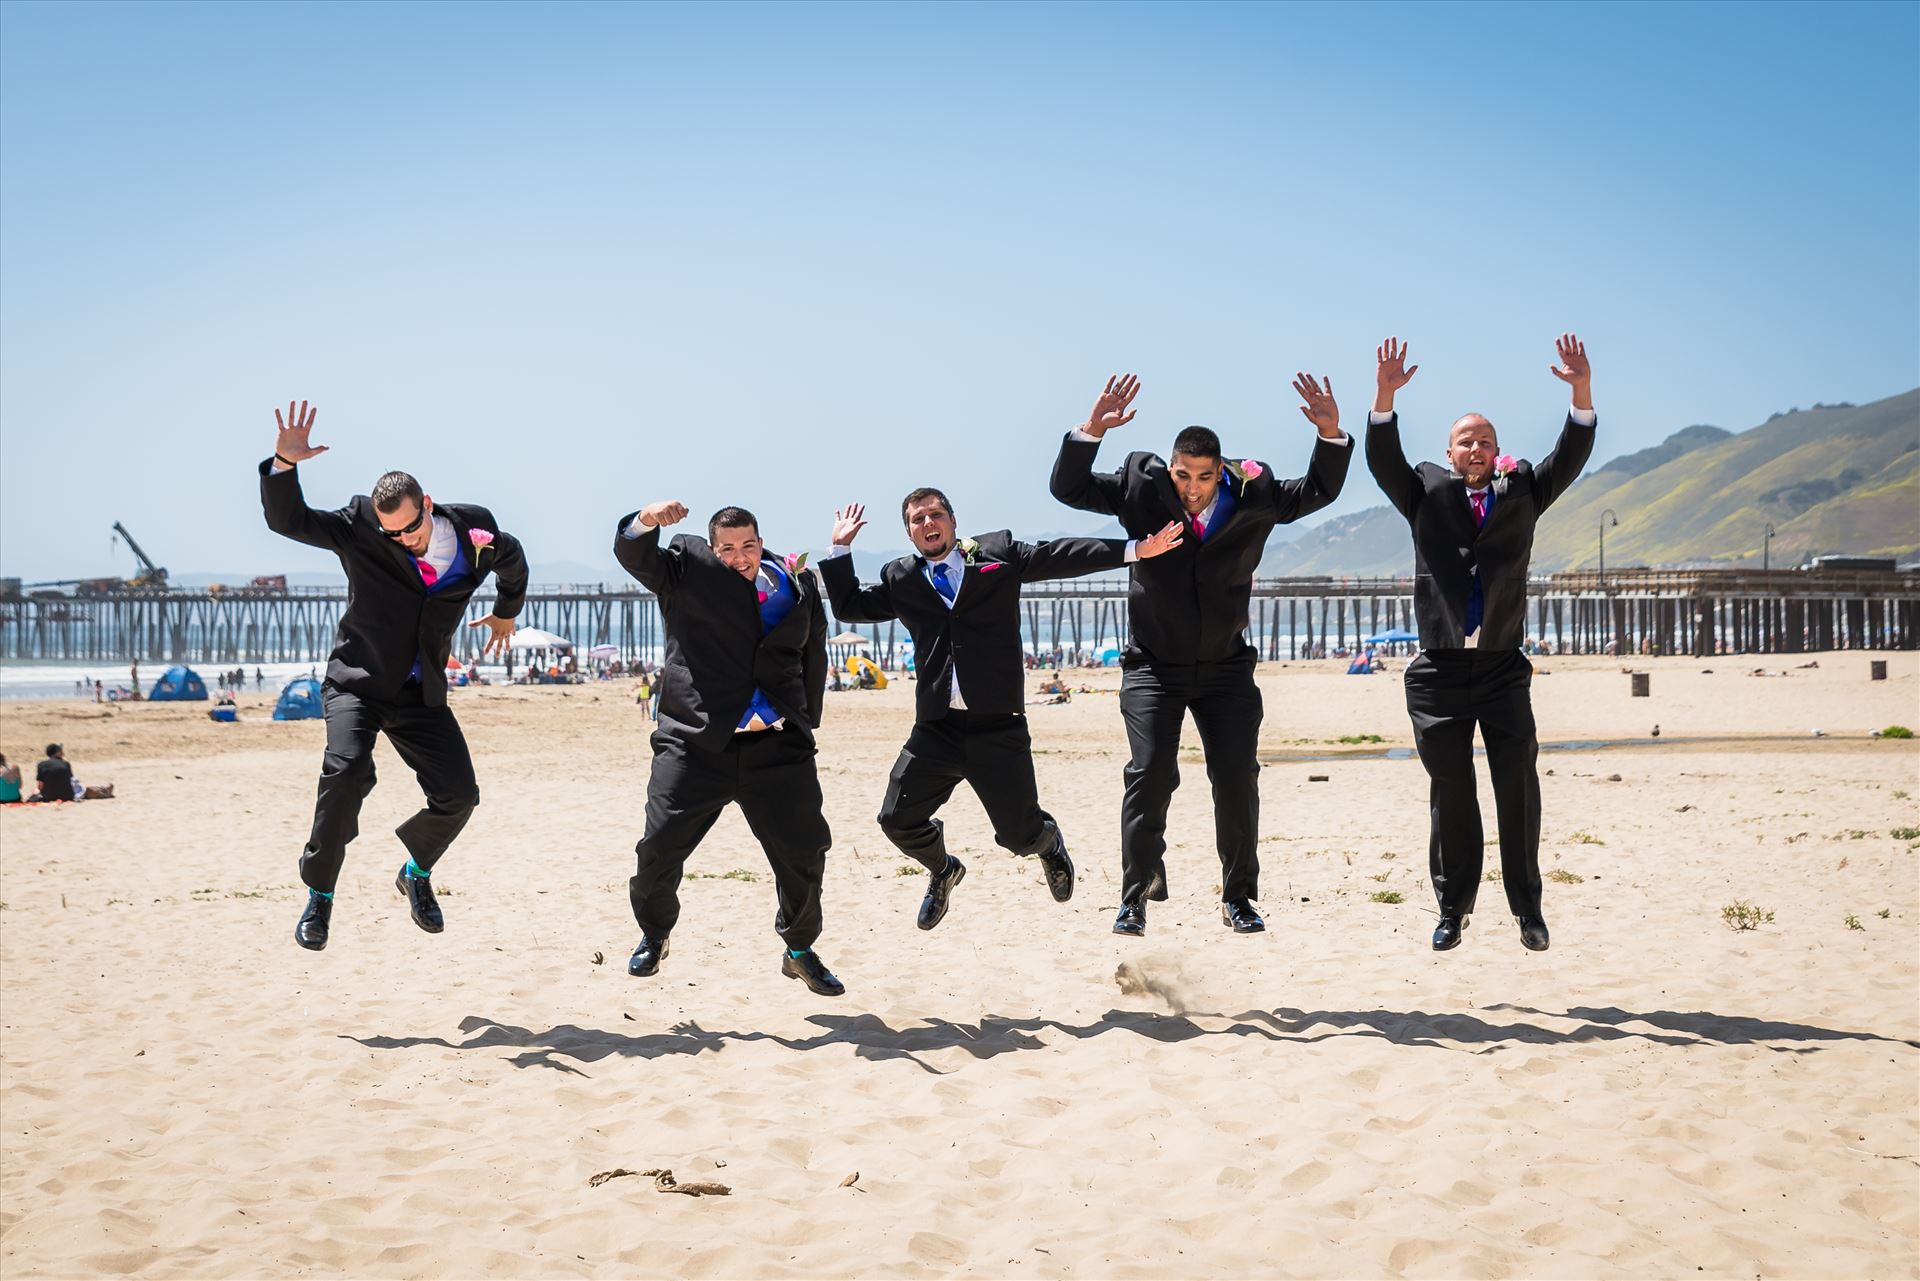 Jessica and Michael 20 Sea Venture Resort and Spa Wedding Photography by Mirror's Edge Photography in Pismo Beach, California. Groom and Groomsmen jumping by Sarah Williams